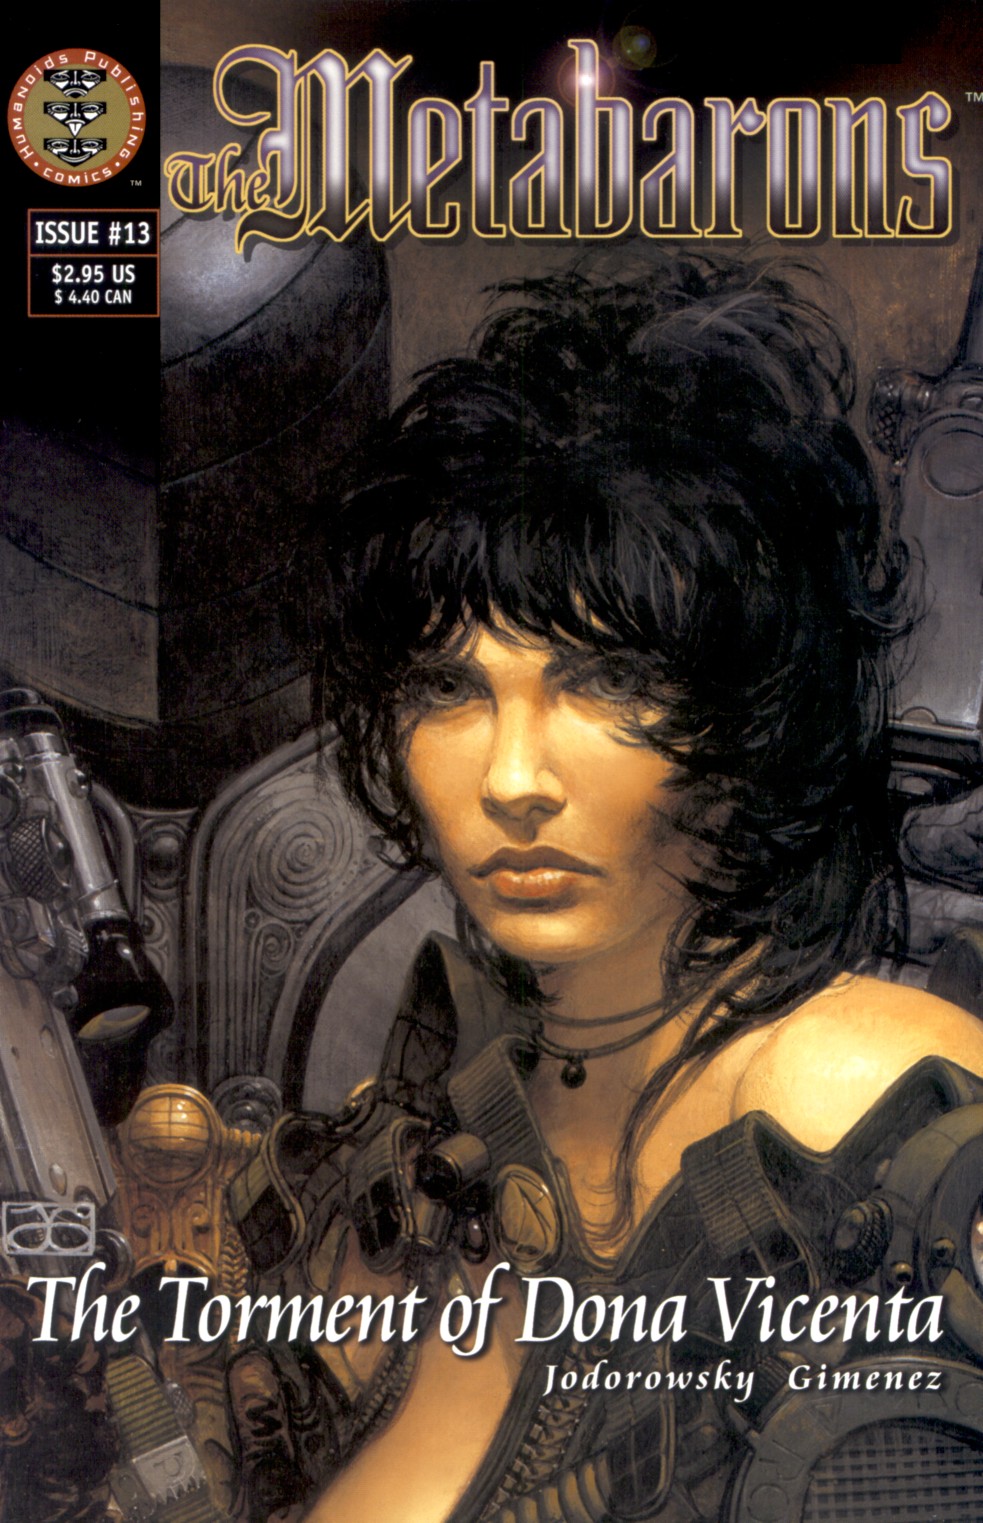 Read online The Metabarons comic -  Issue #13 - The Torment Of Dona vicenta - 1